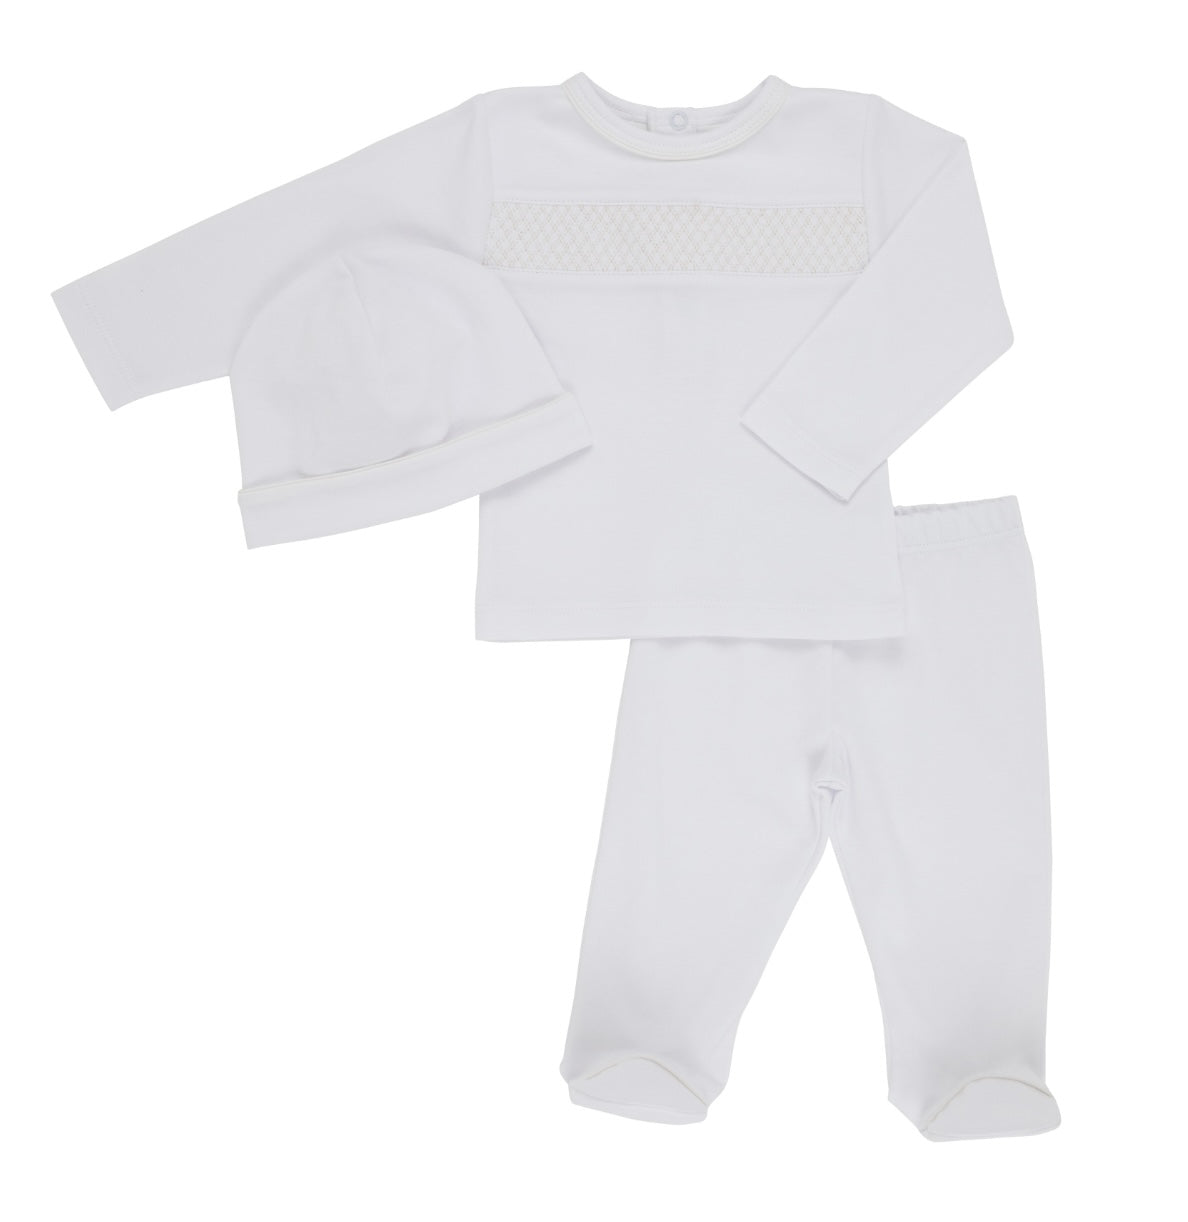 Smocked Hart's Hold Me Set - Worth Ave White/Palmetto Pearl